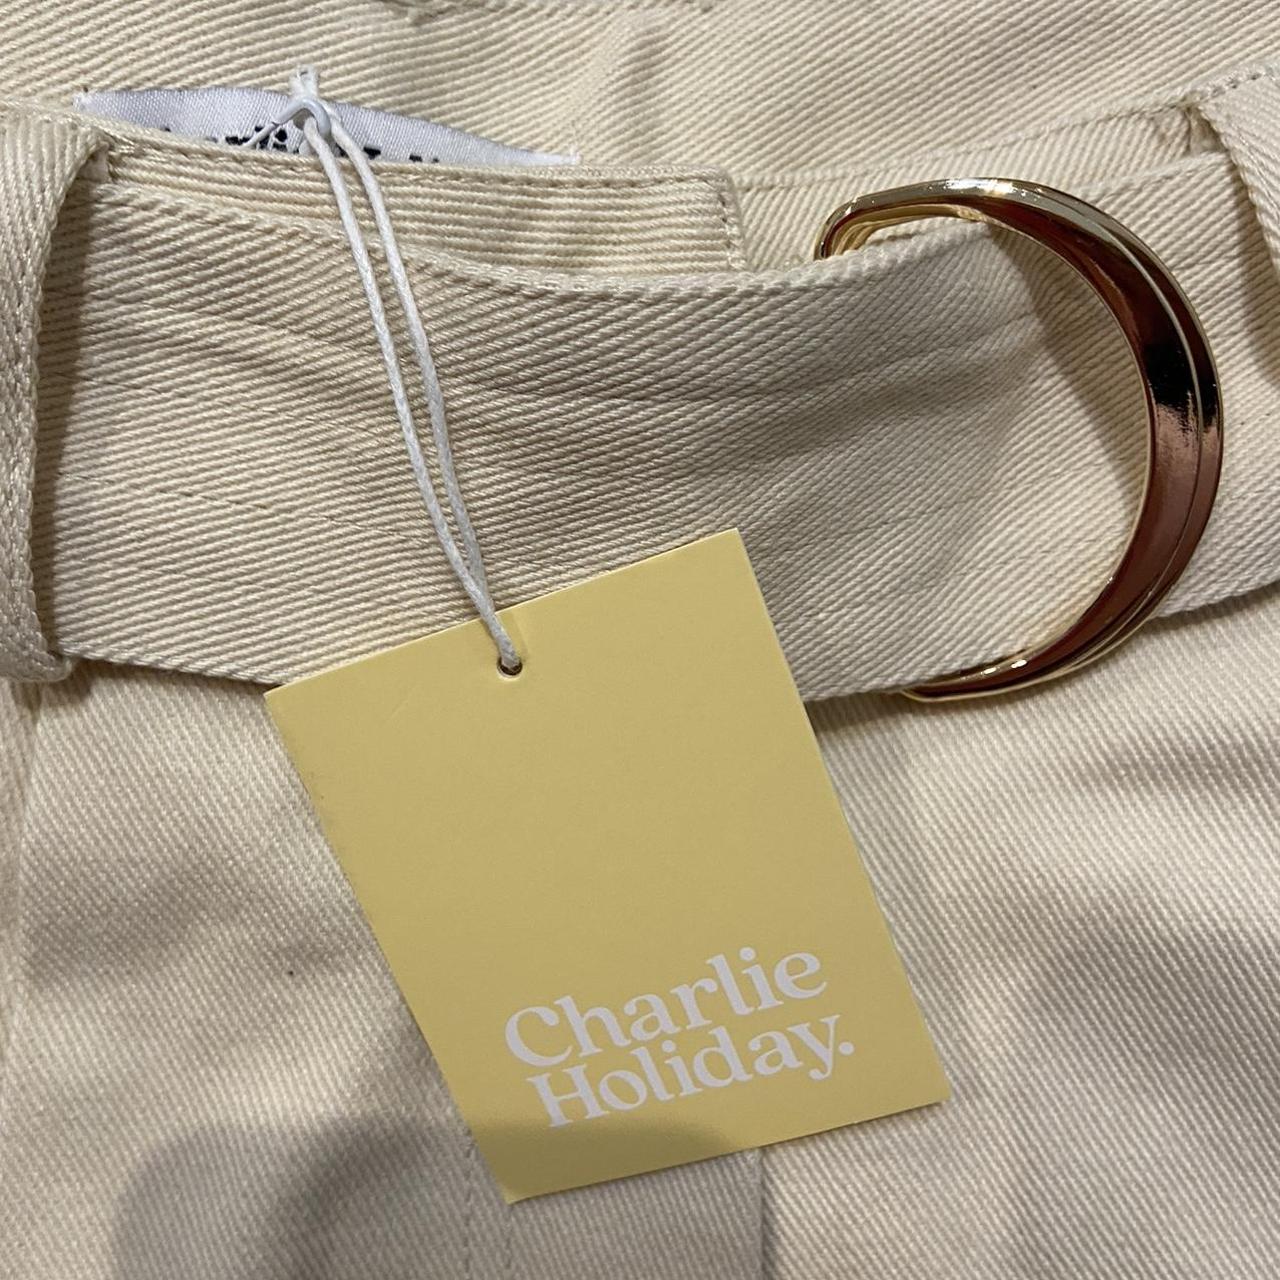 Product Image 2 - NWT Charlie Holiday Frankie Oyster